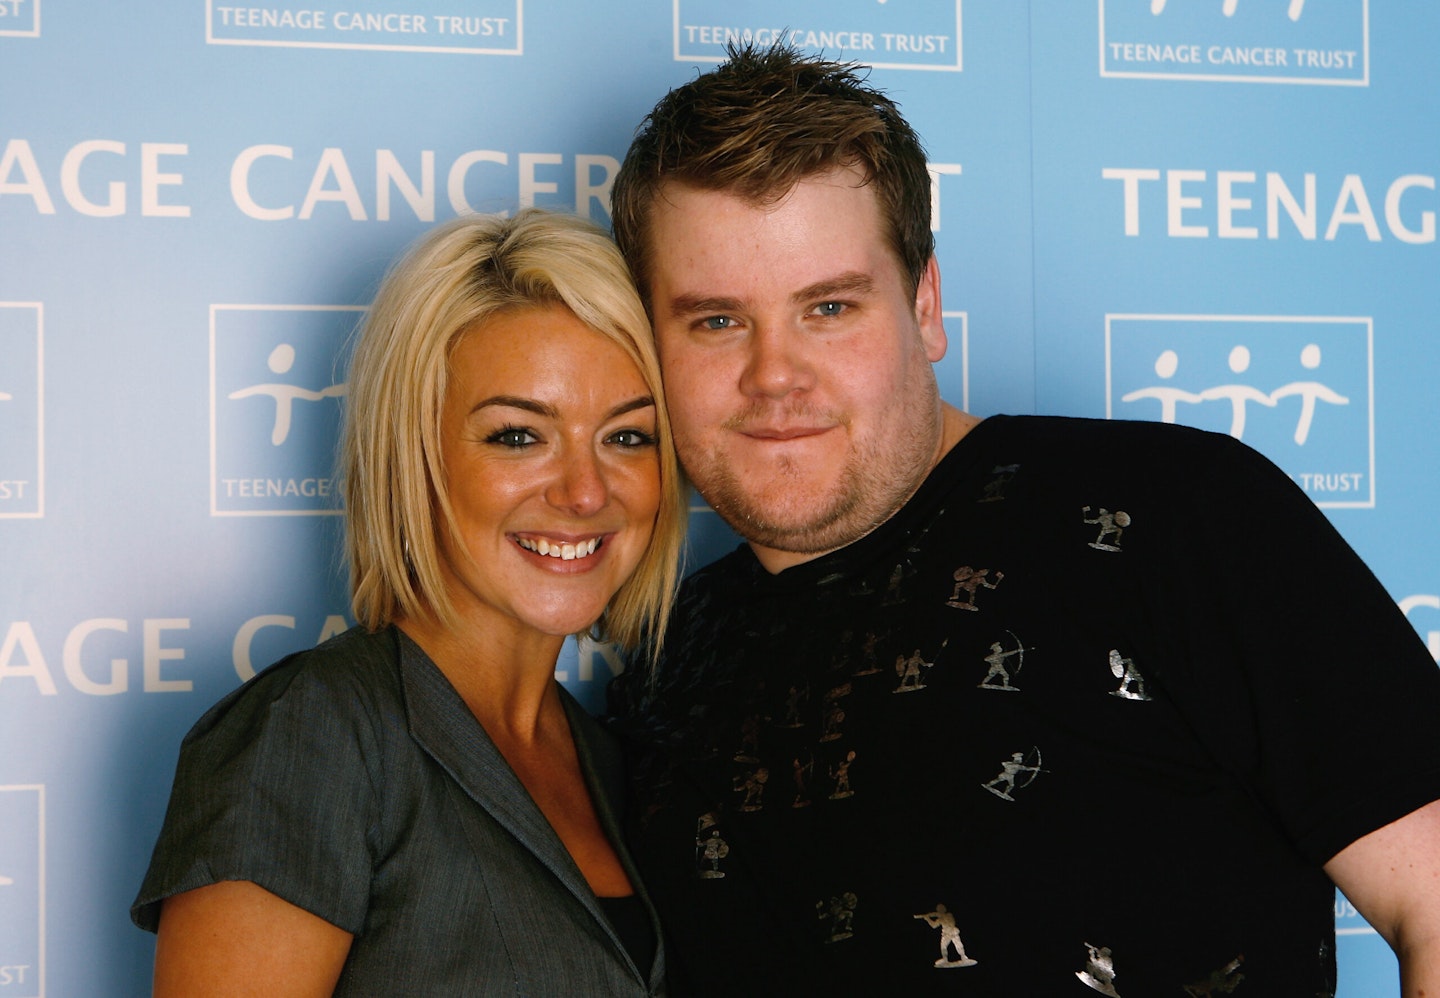 Sheridan with close pal James Corden in 2009